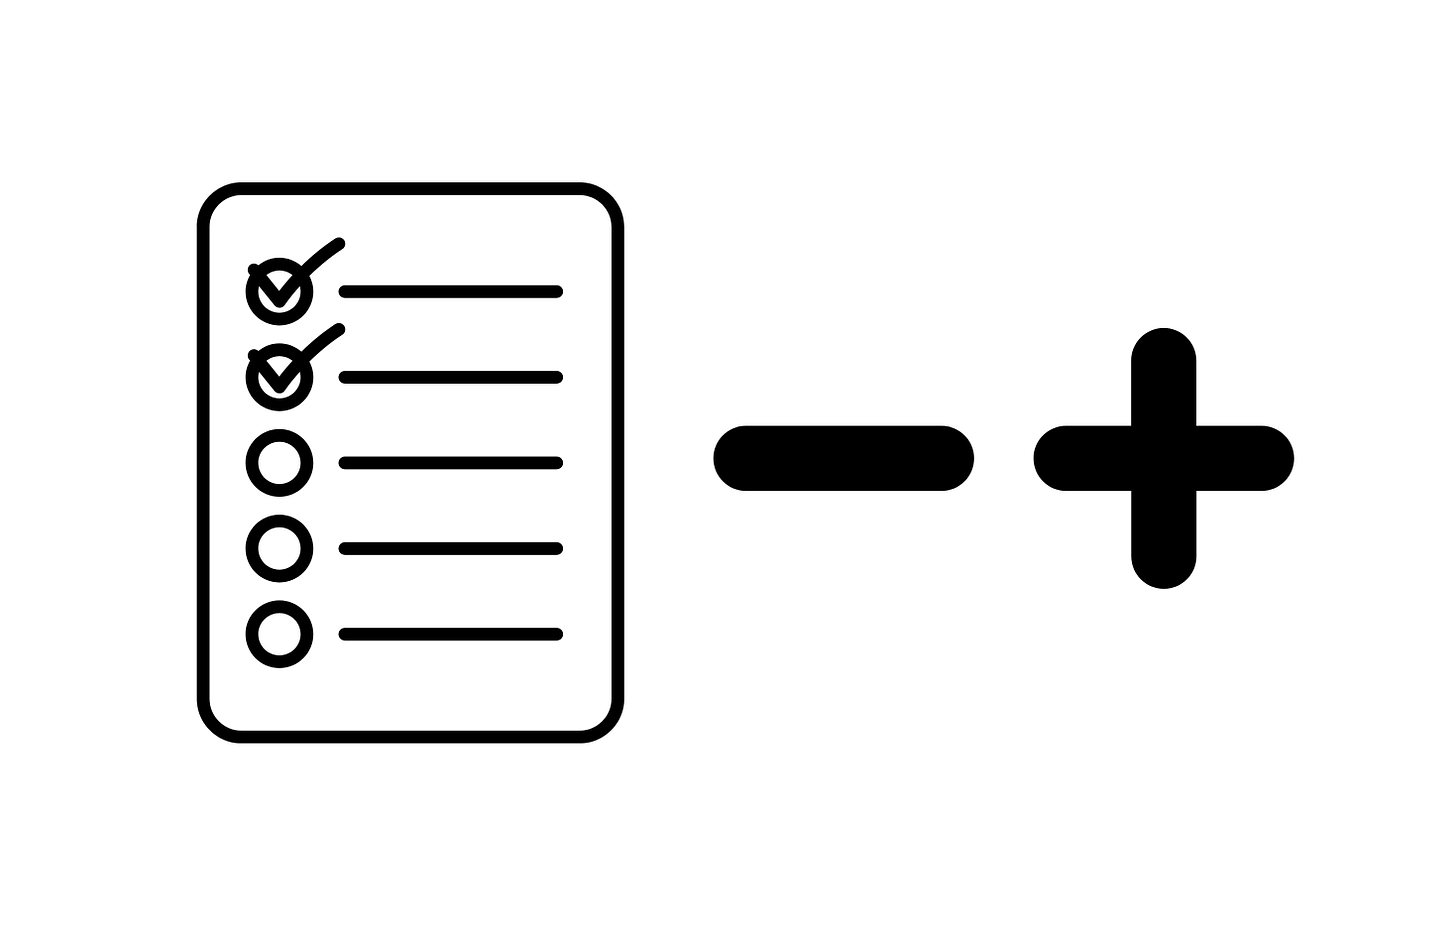 A to do list on the left and the subtraction and addition symbols to the right.